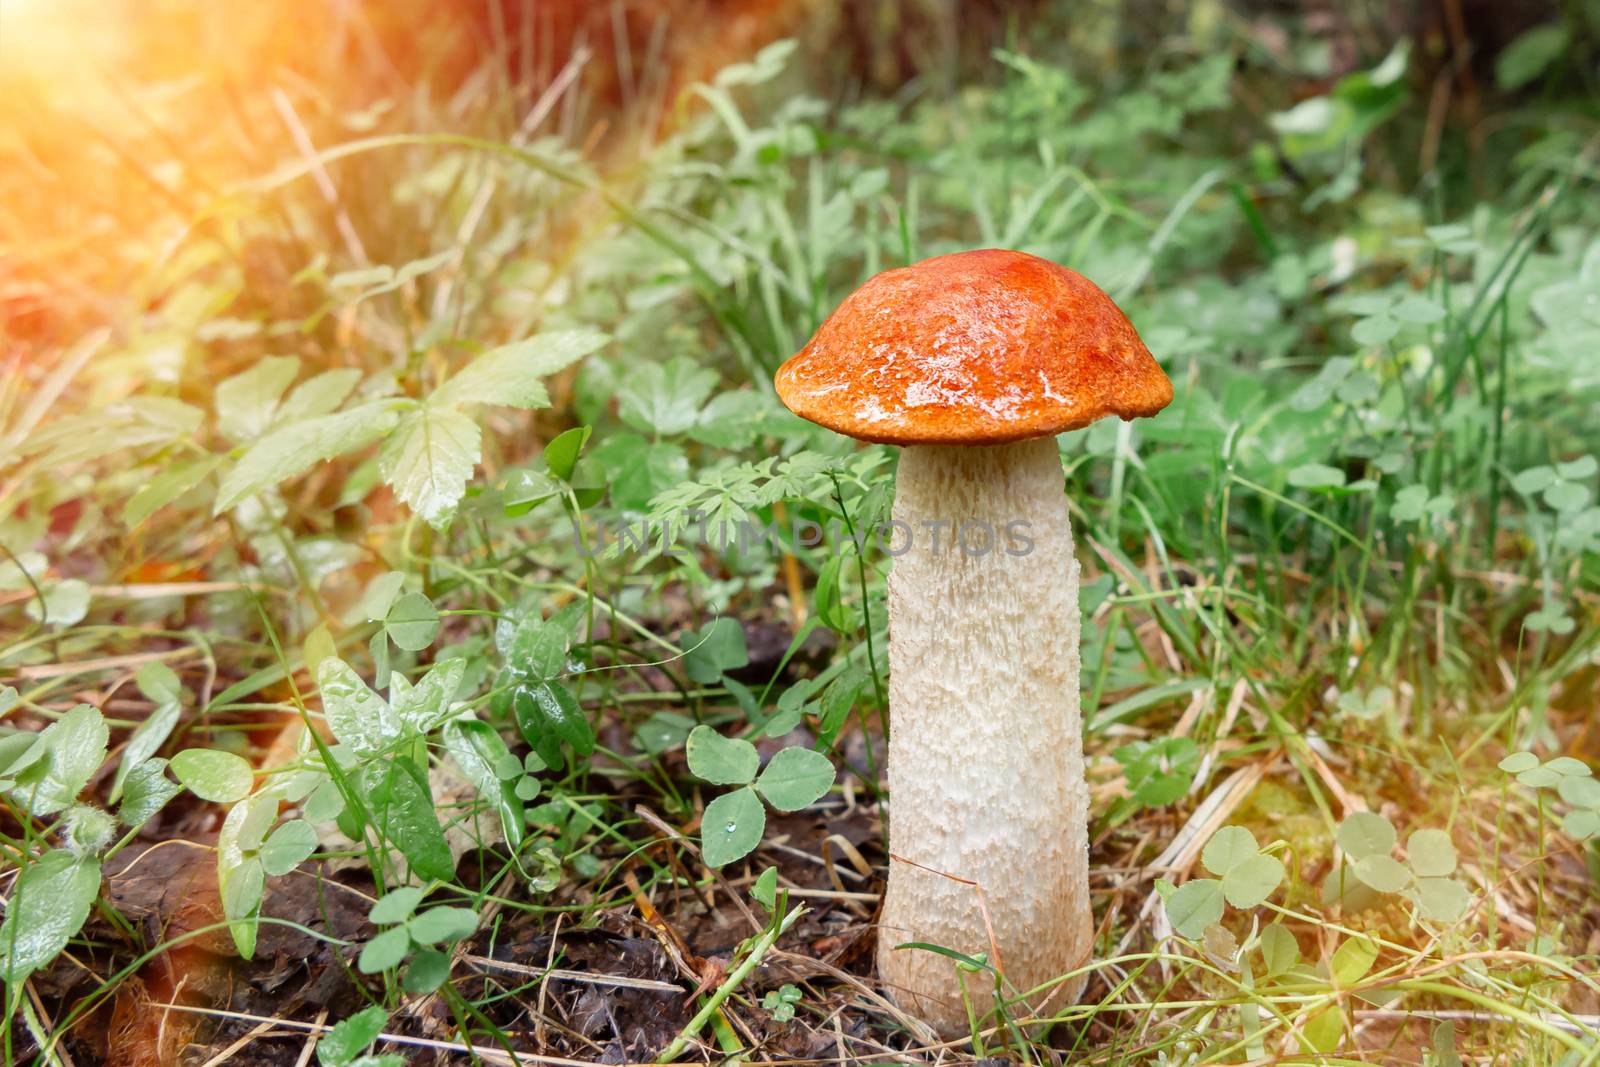 beautiful little mushroom Leccinum known as a Orange birch bolete, grows in a forest at sunrise- image.